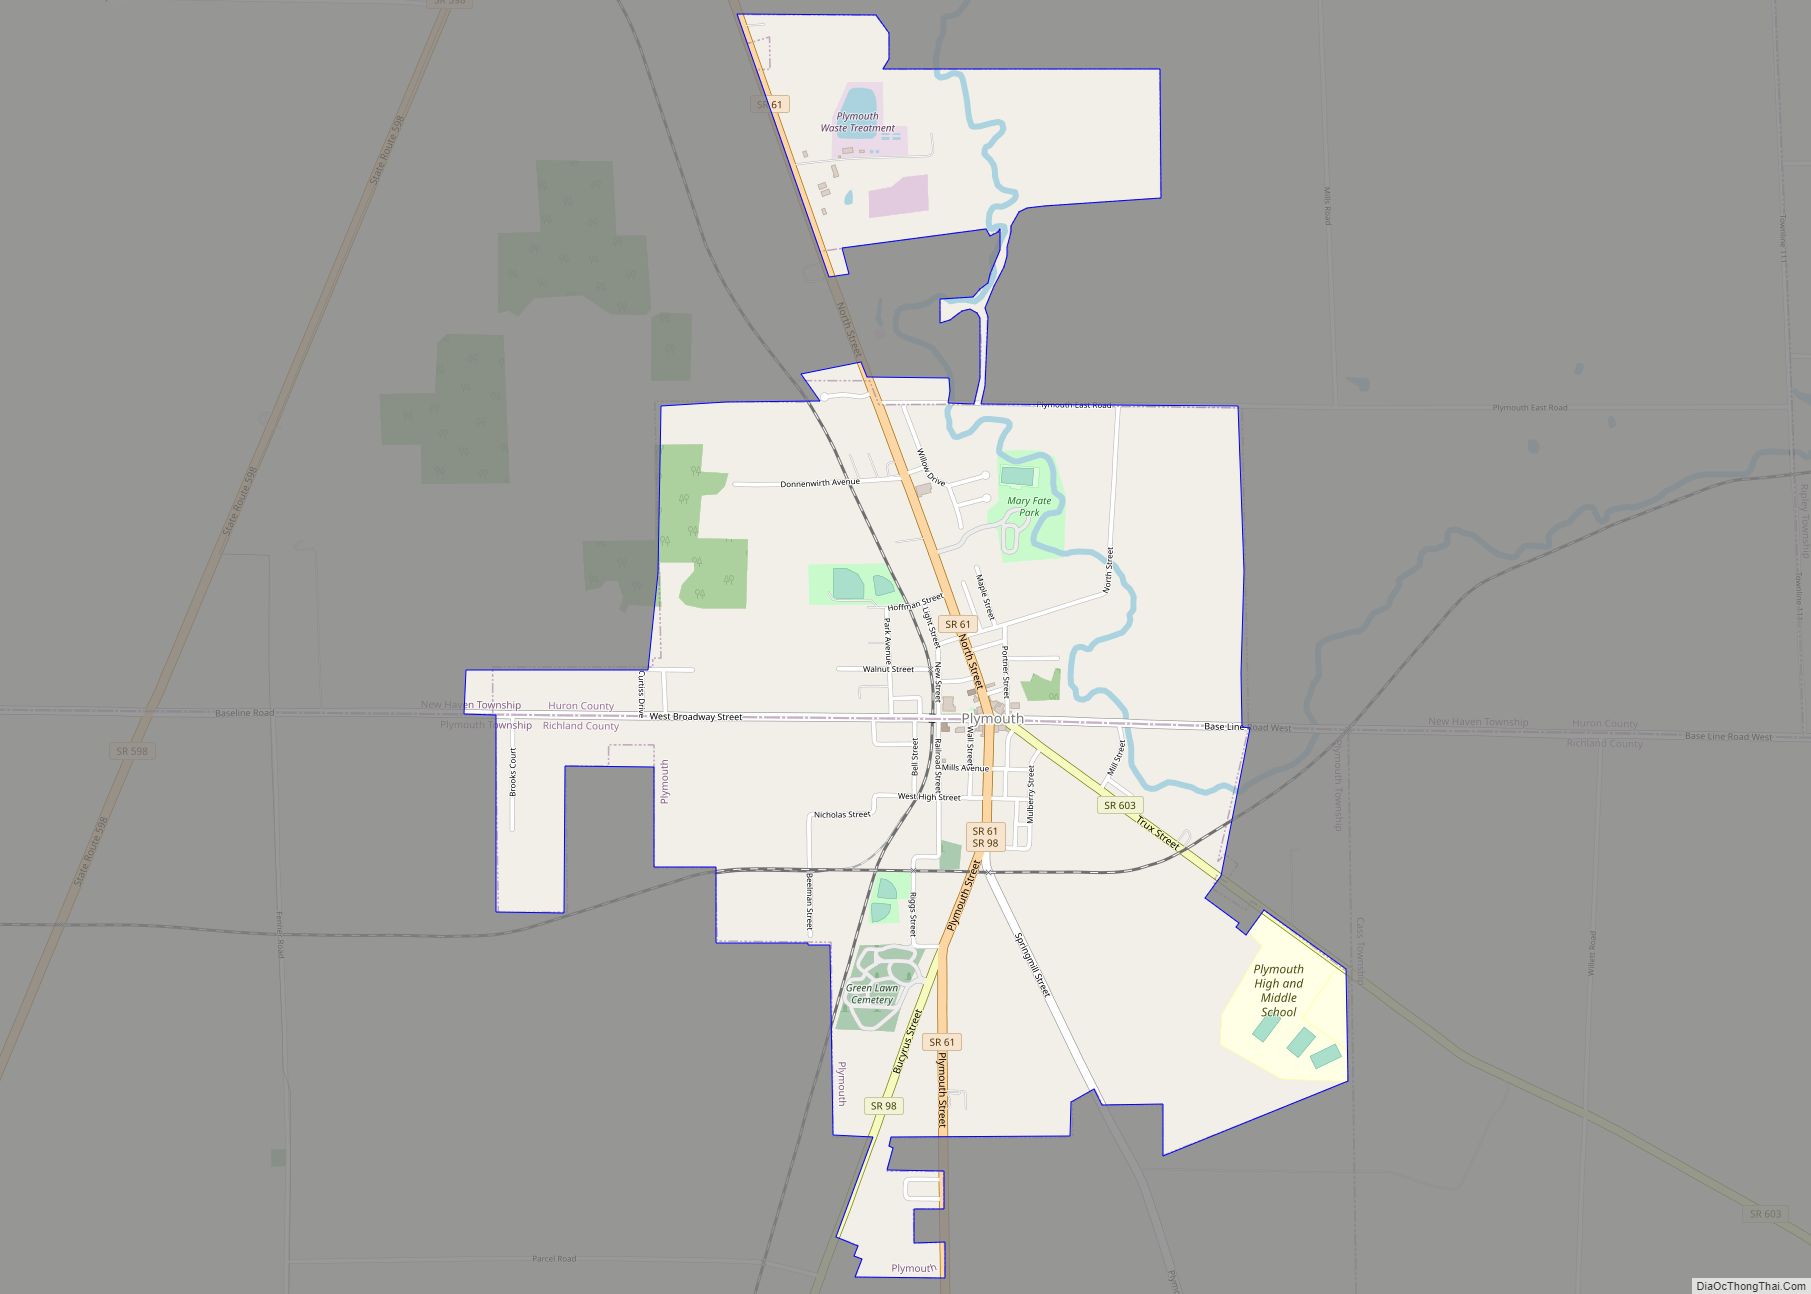 Map of Plymouth village, Ohio